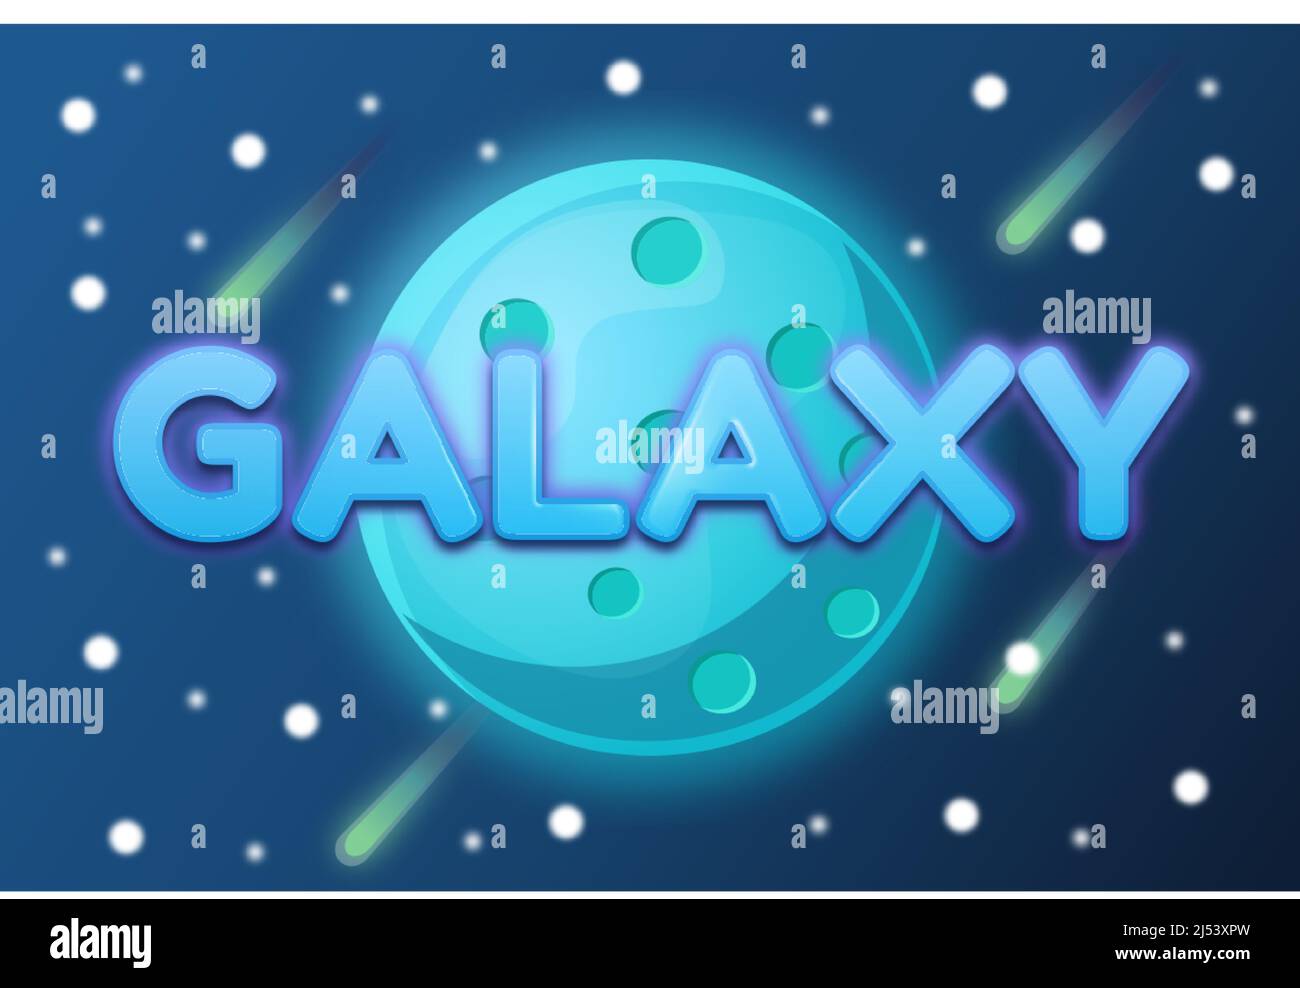 Editable text effects Galaxy , words and font can be changed Stock Vector